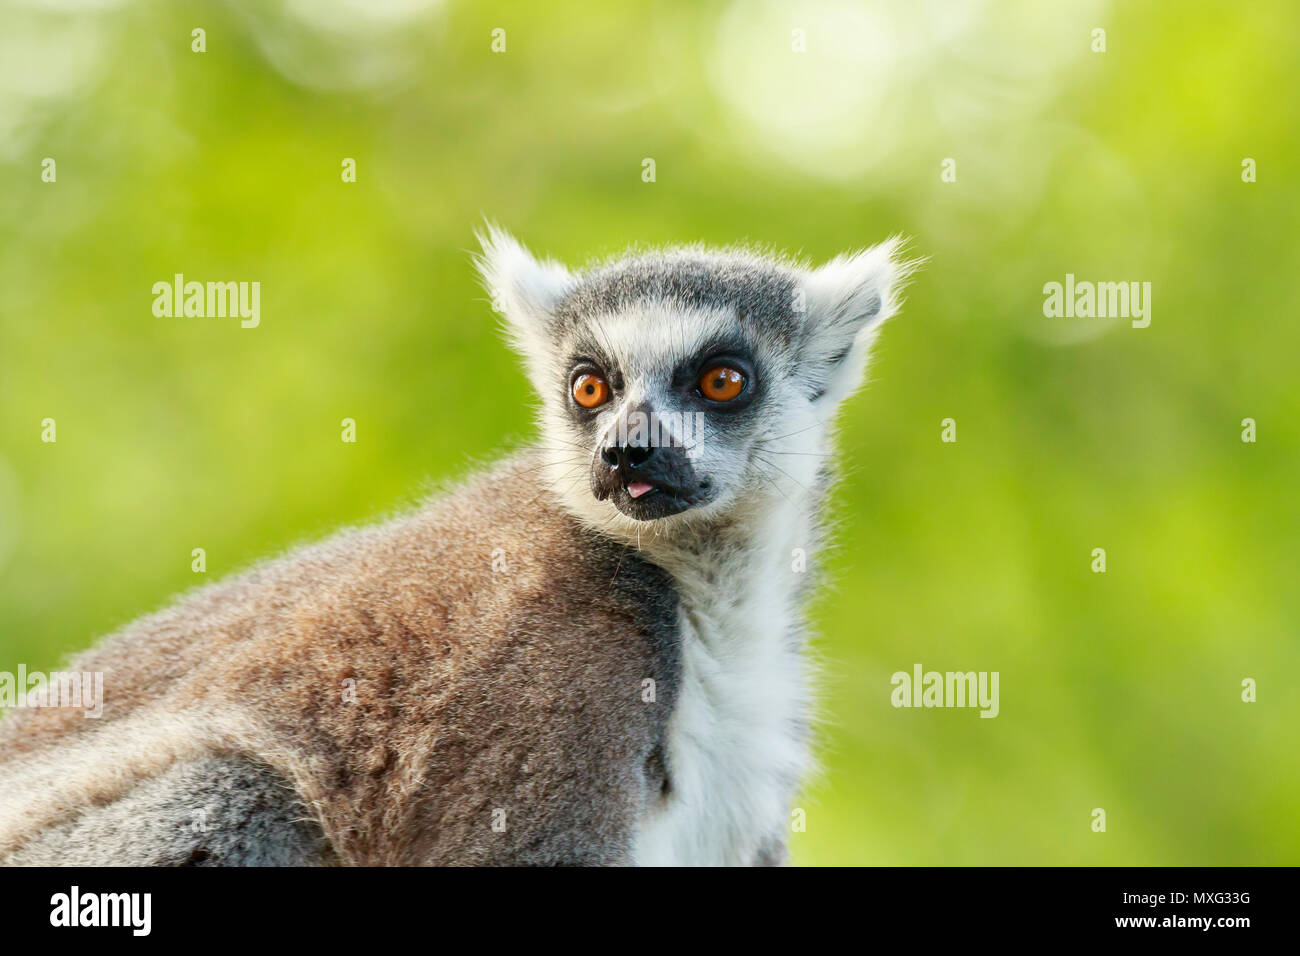 Closeup portrait of a ring-tailed lemur (Lemur catta) perched in a tree in a forest. These primates are native to the island Madagascar. Stock Photo